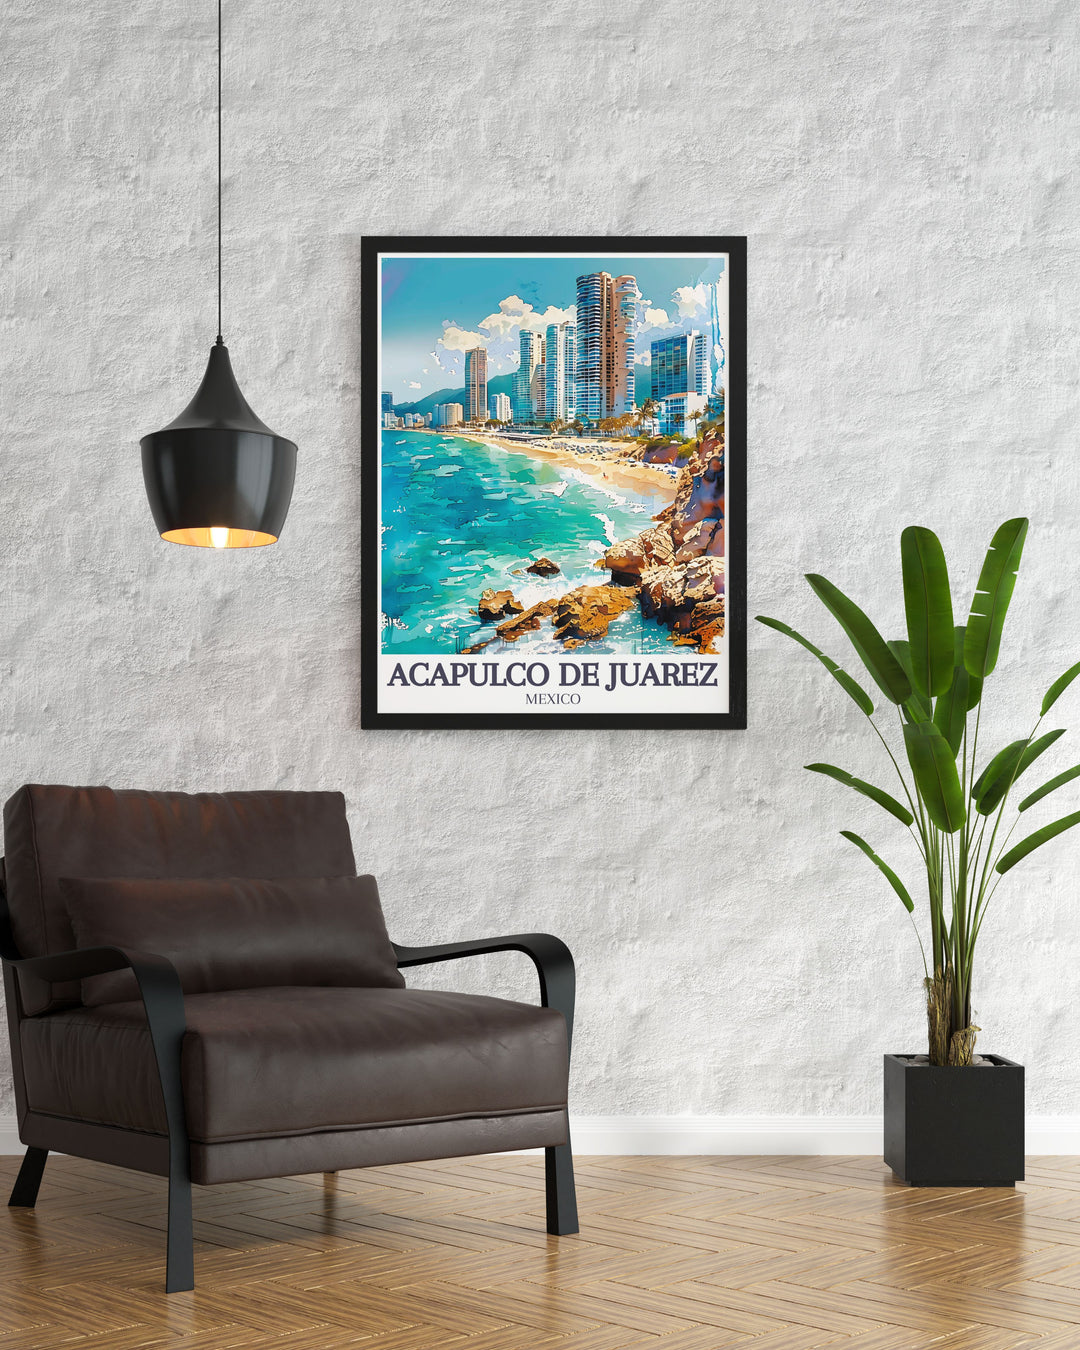 This poster of Acapulco de Juárez showcases the majestic Acapulco Bay and the iconic Las Torres Gemelas, offering a glimpse into the citys unique appeal.